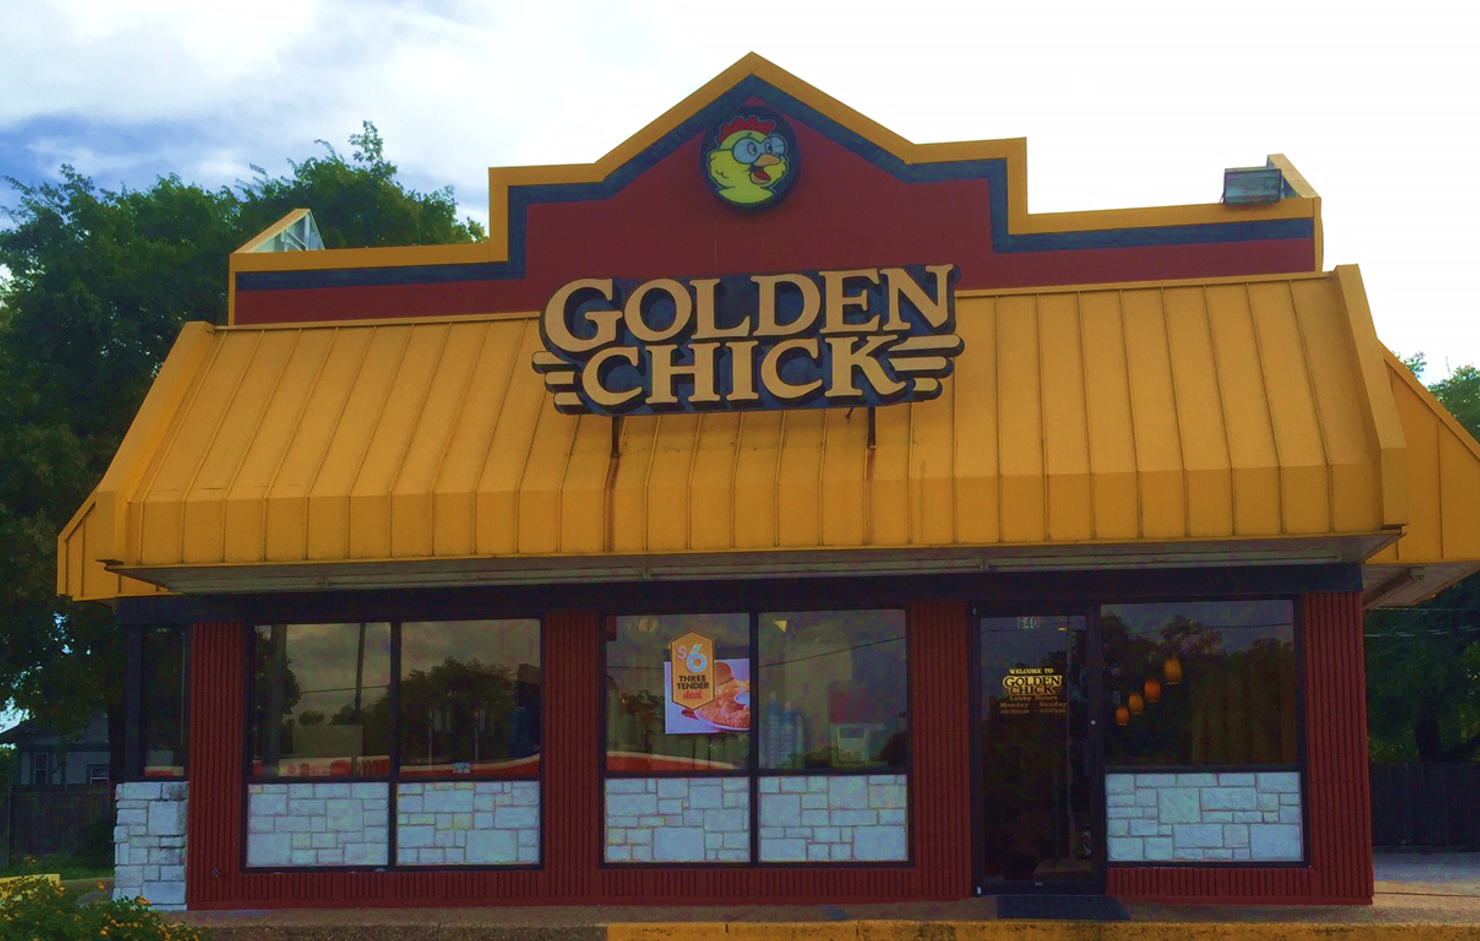 Golden Chick storefront.  Your local Golden Chick fast food restaurant in Lockhart, Texas